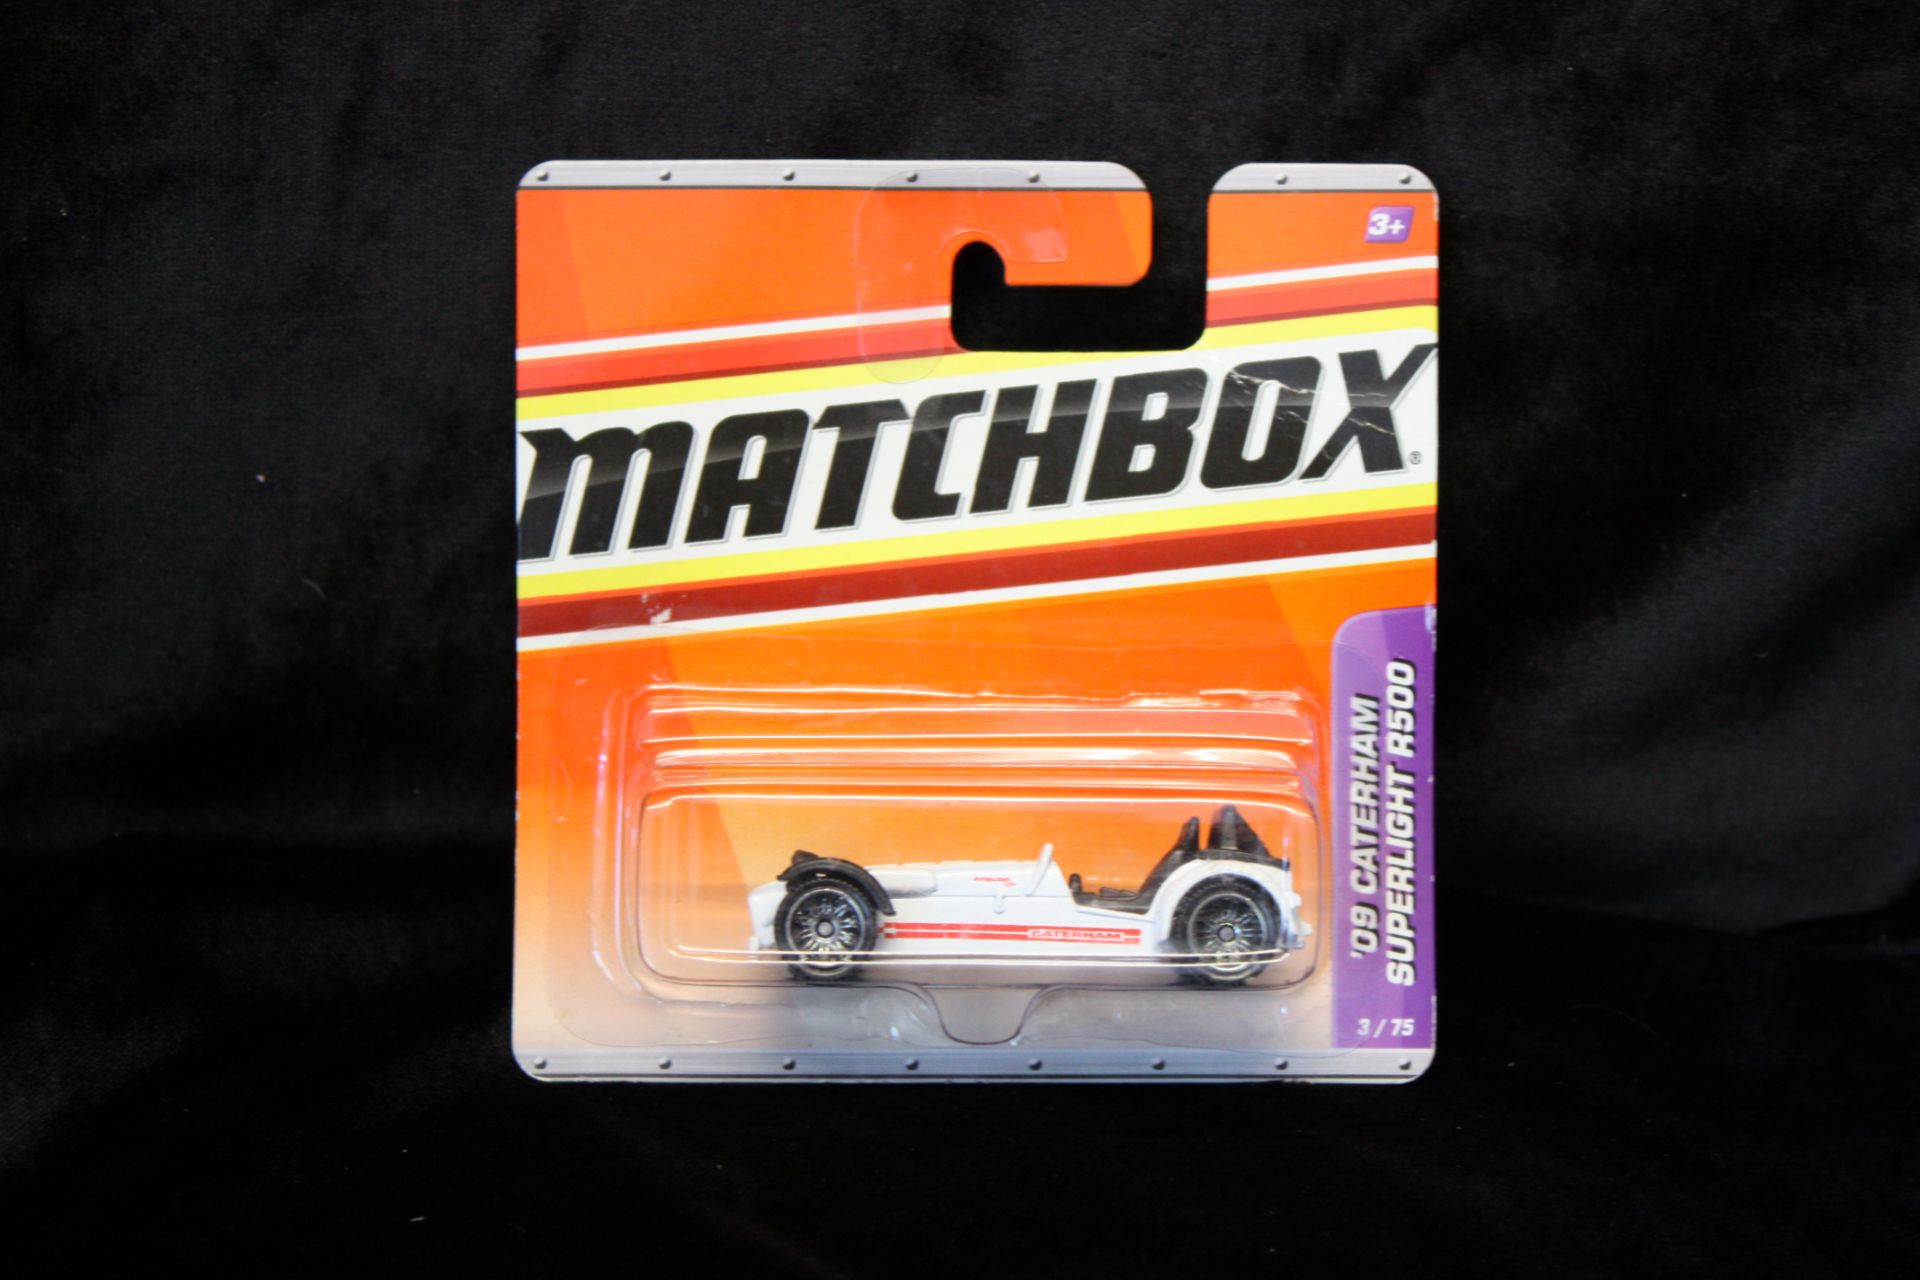 Matchbox 2009 Caterham Superlight R500 - White 3/75. Model is part of an old private collection -